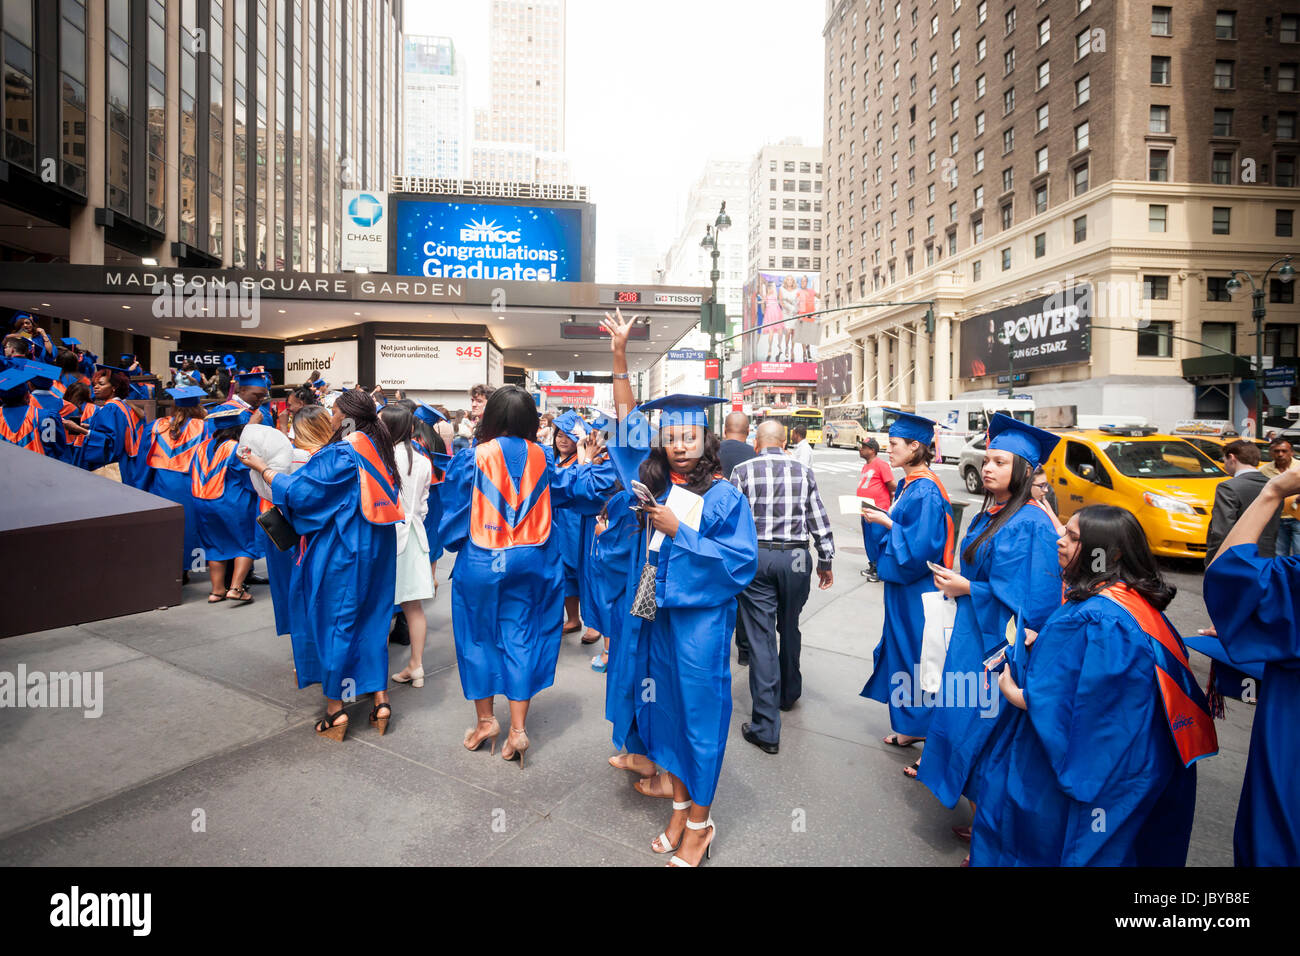 graduating-students-from-the-borough-of-manhattan-community-college-wait-to-enter-madison-square